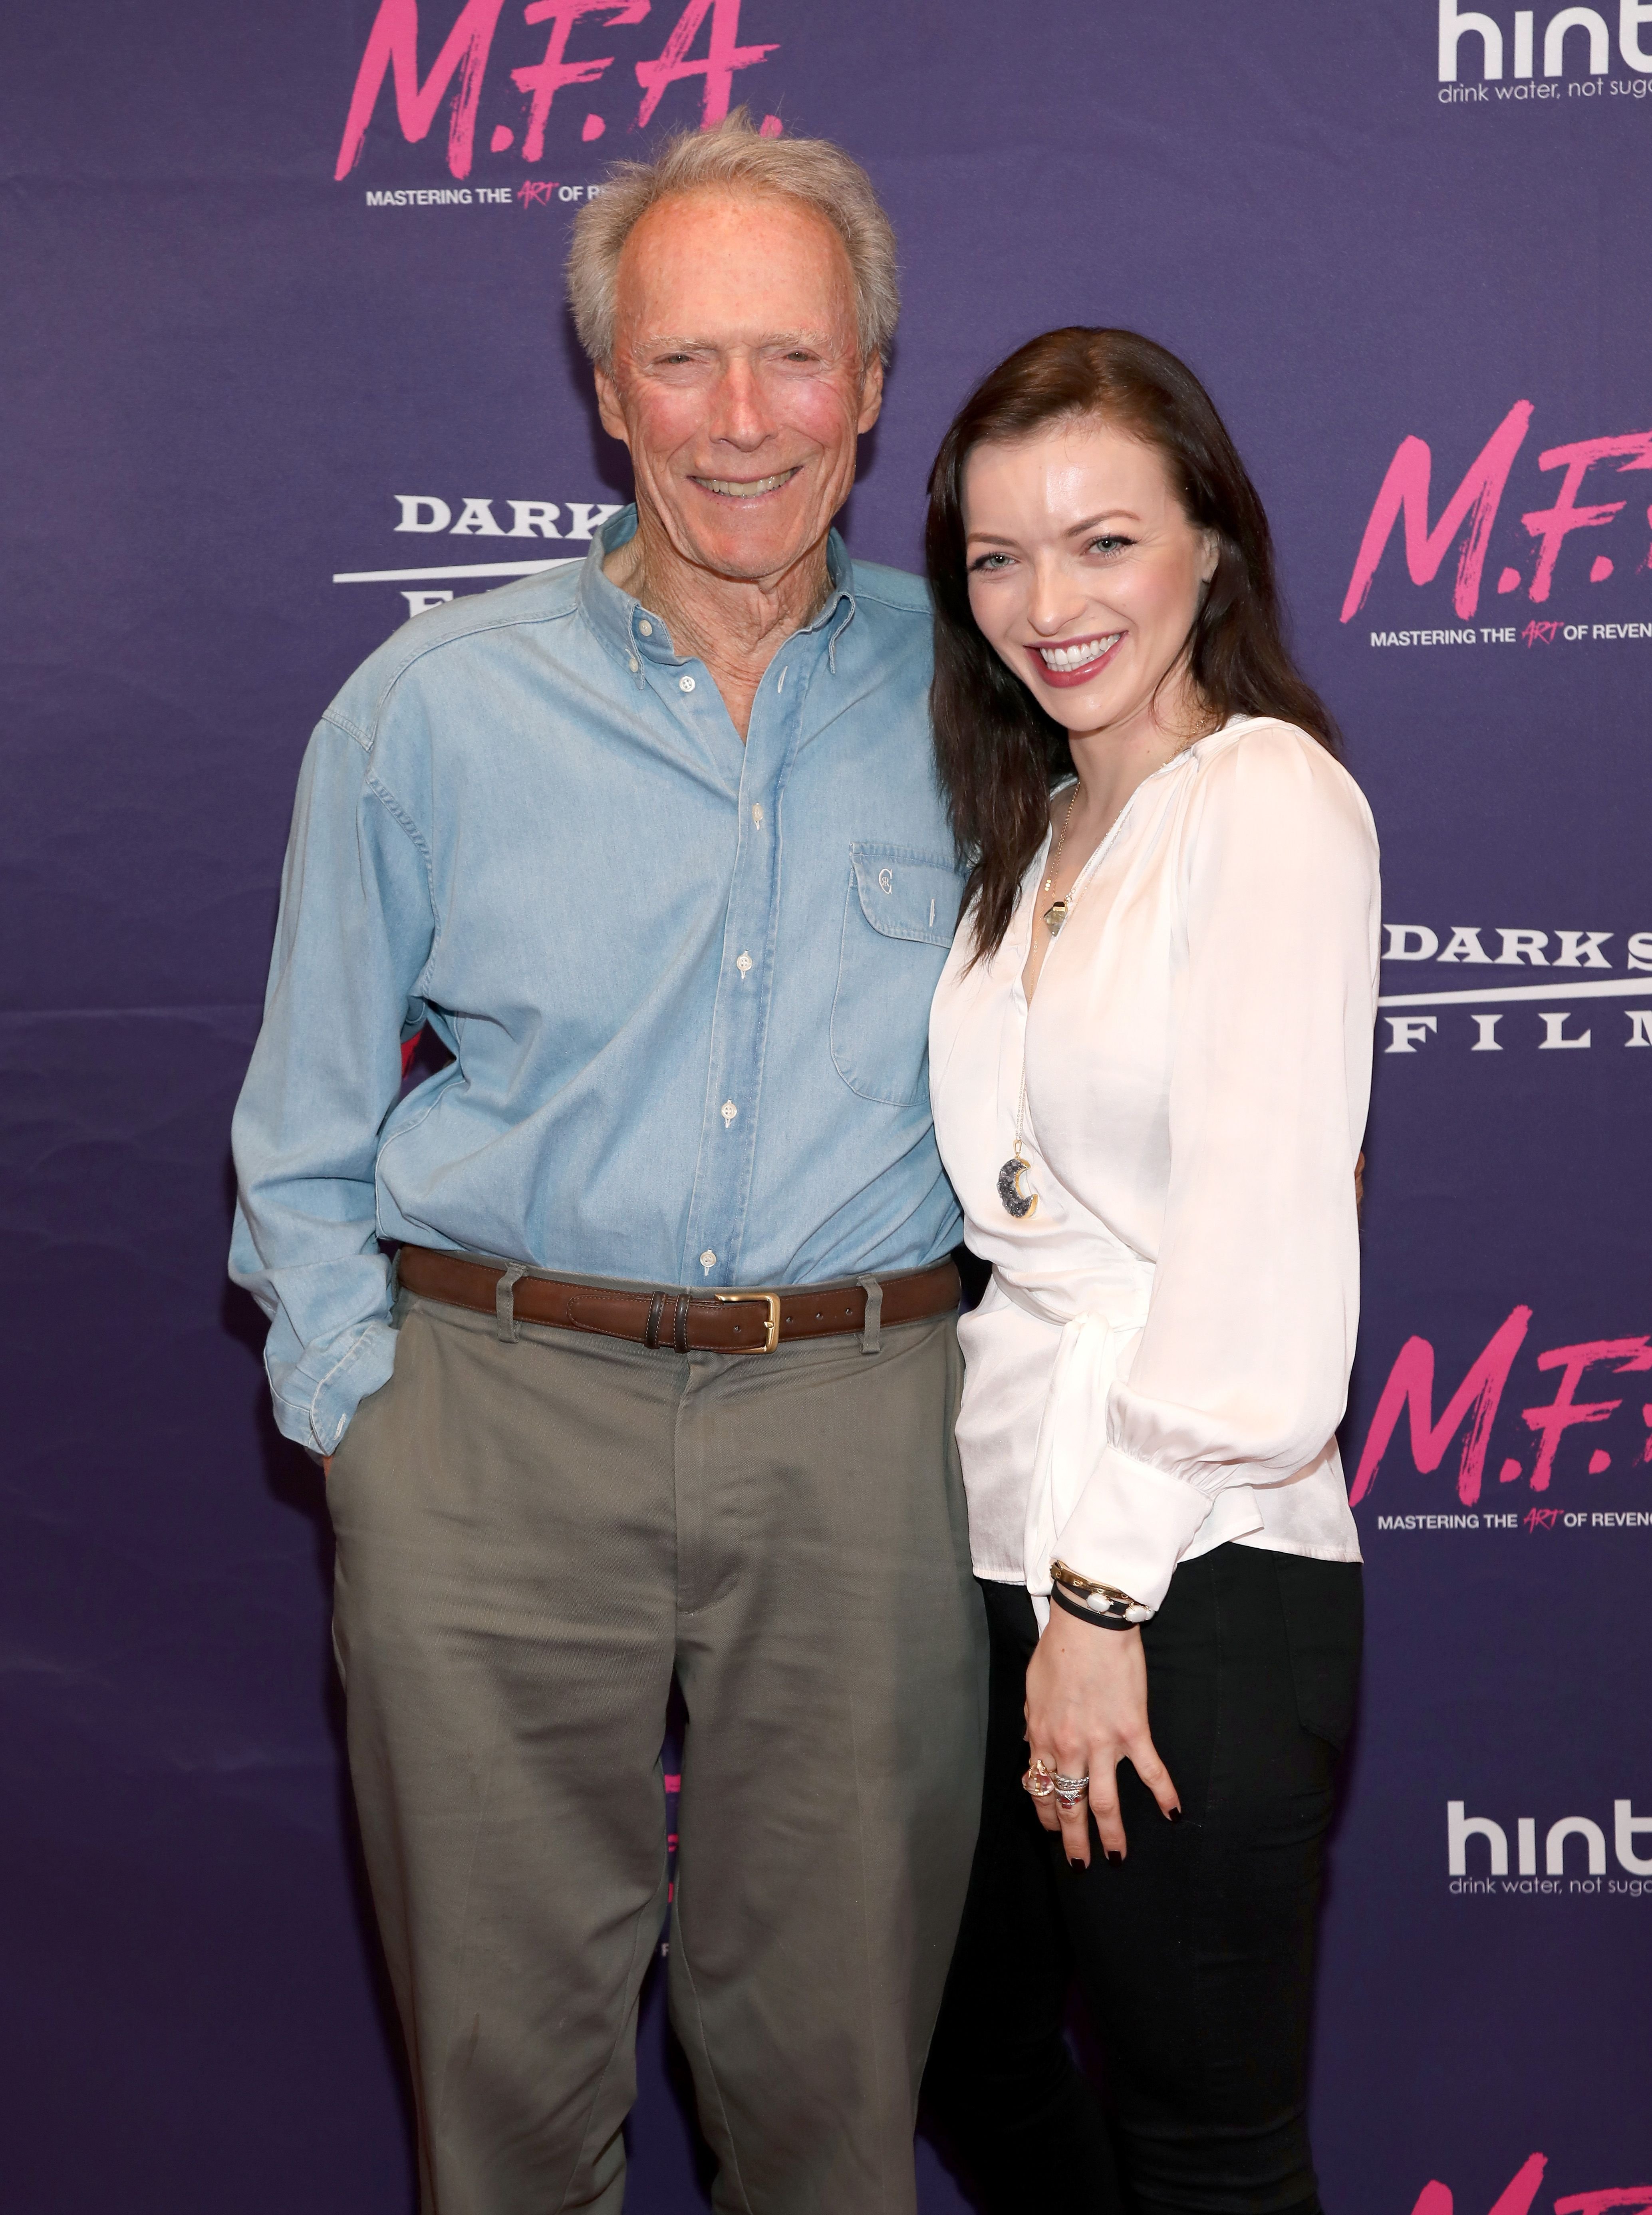 Clint Eastwood and daughter Francesca Eastwood at the Premiere Of Dark Sky Films' "M.F.A." at The London West Hollywood on October 2, 2017. | Photo: Getty Images